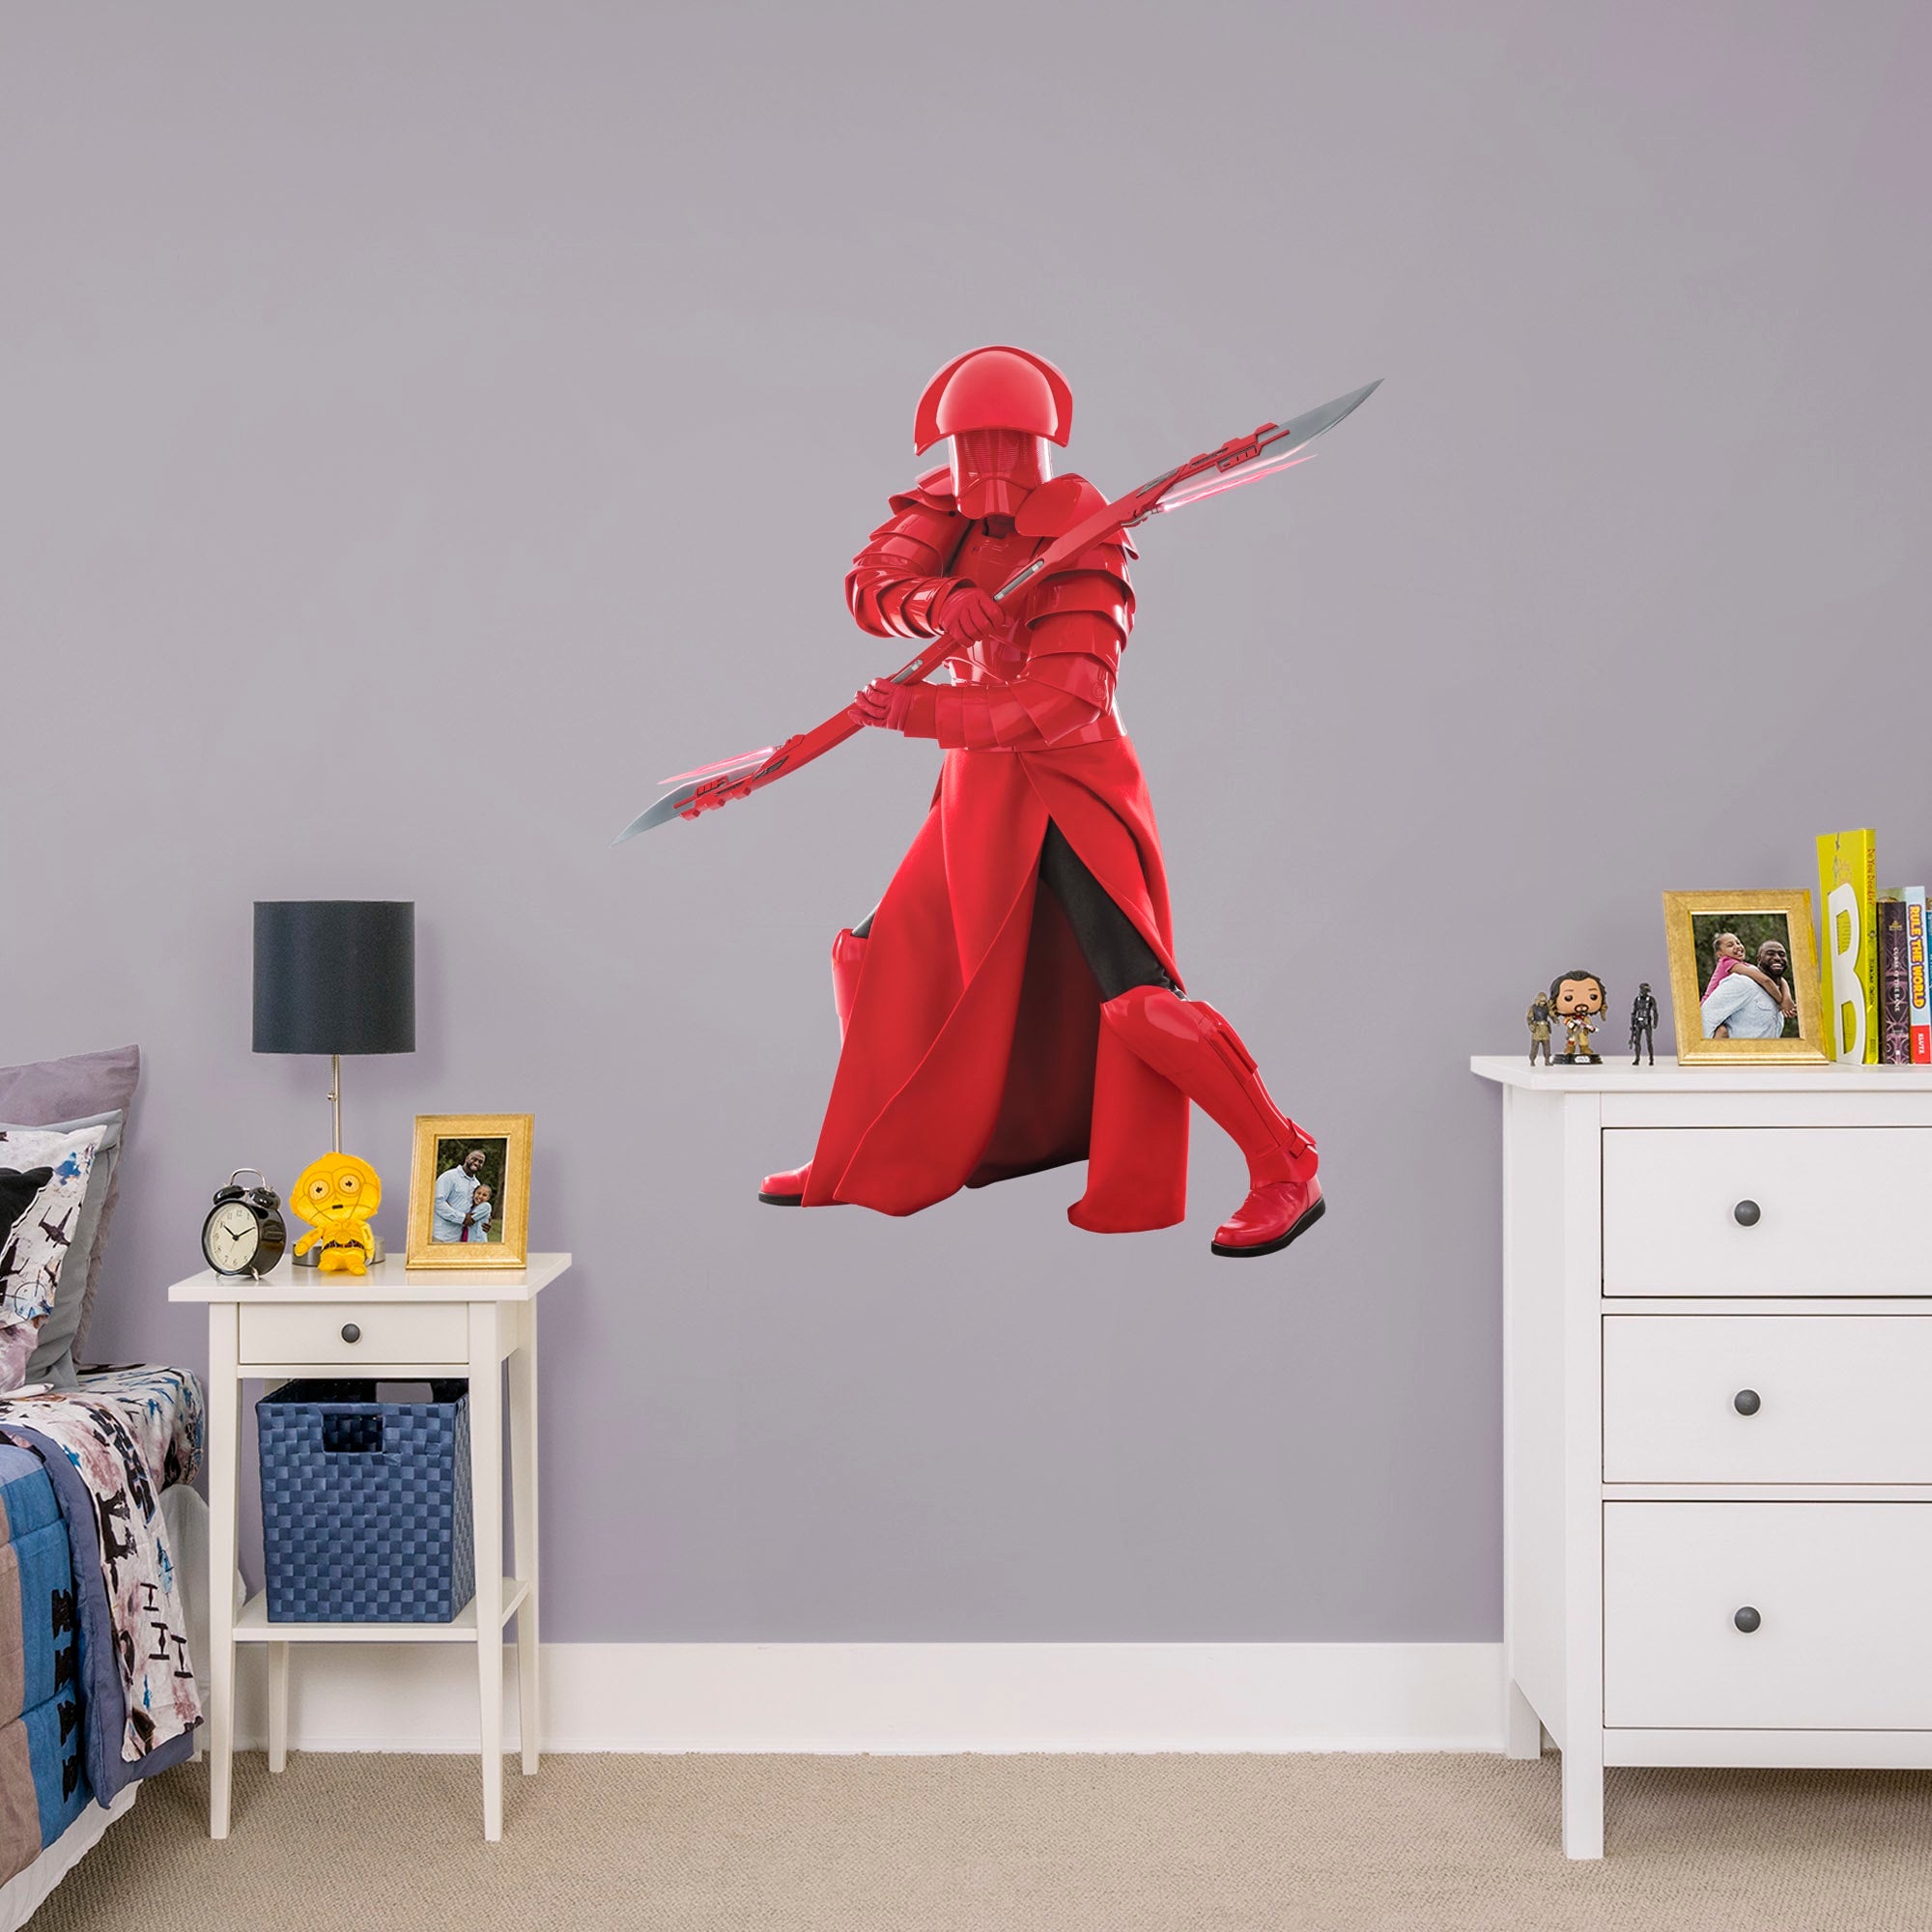 Praetorian Guard - Officially Licensed Removable Wall Decal Giant Character + 2 Decals (41"W x 48"H) by Fathead | Vinyl